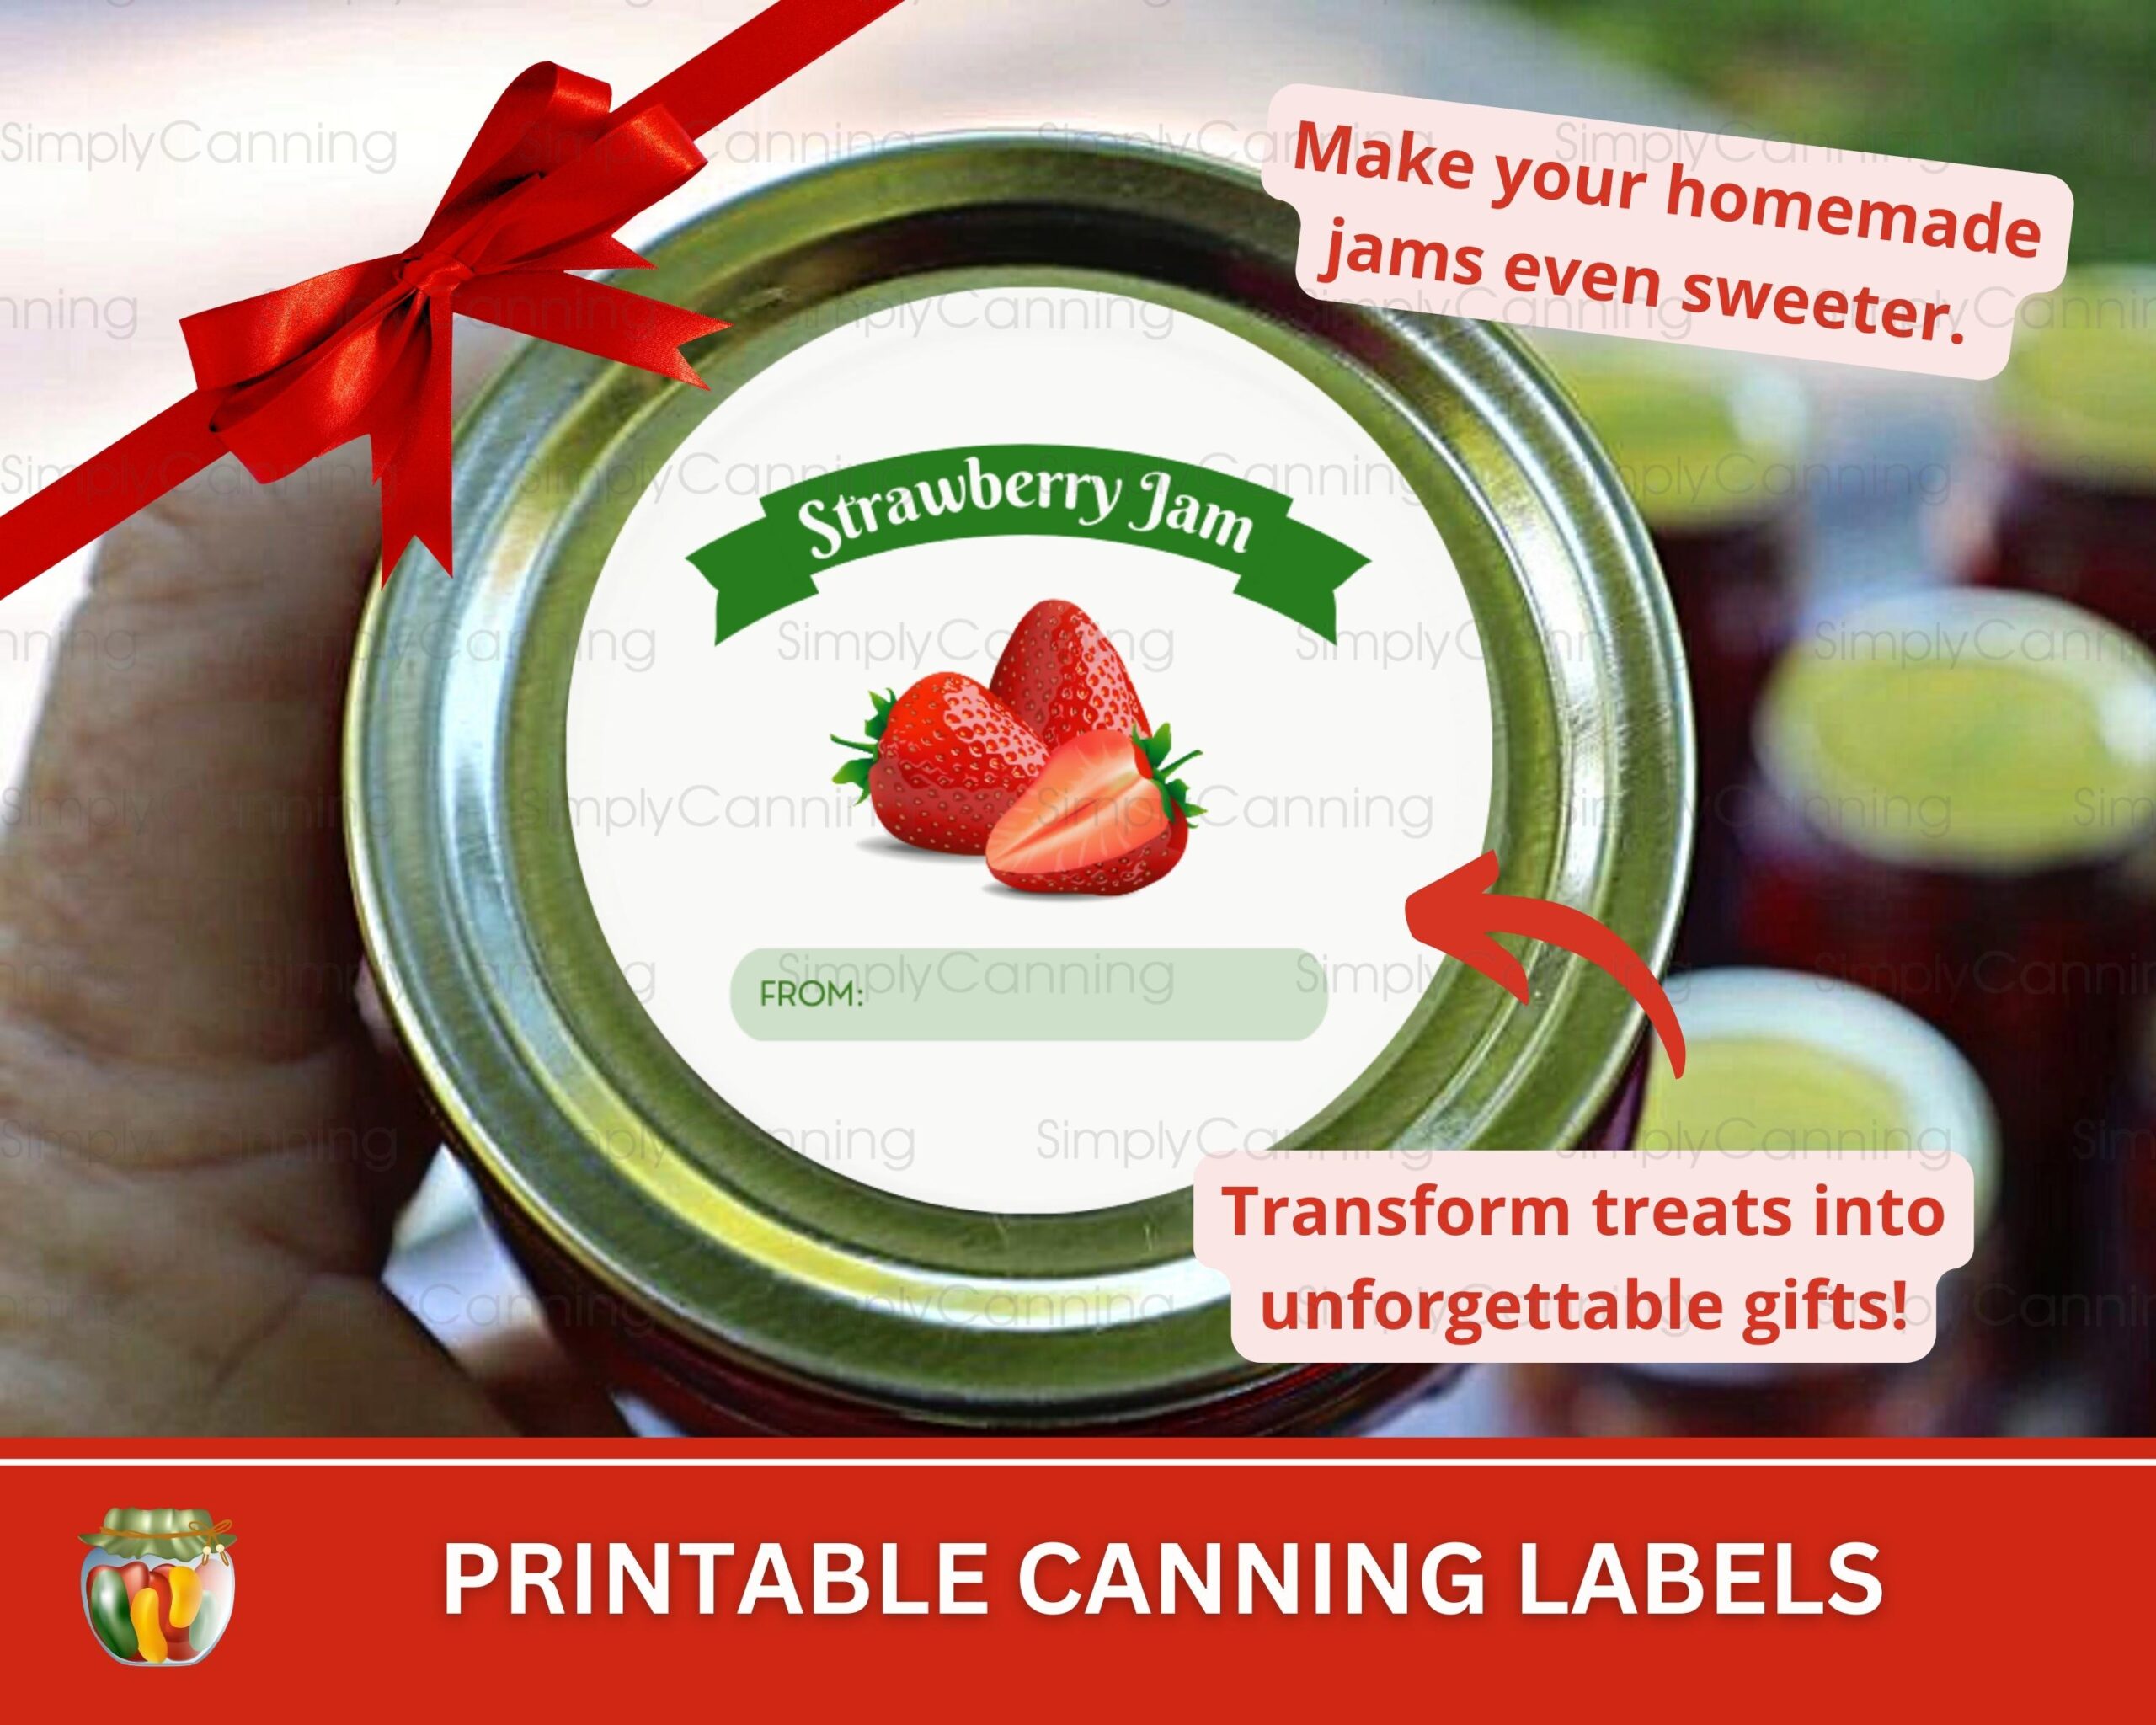 Image of strawberry jam canning label, links to printable canning labels to purchase.